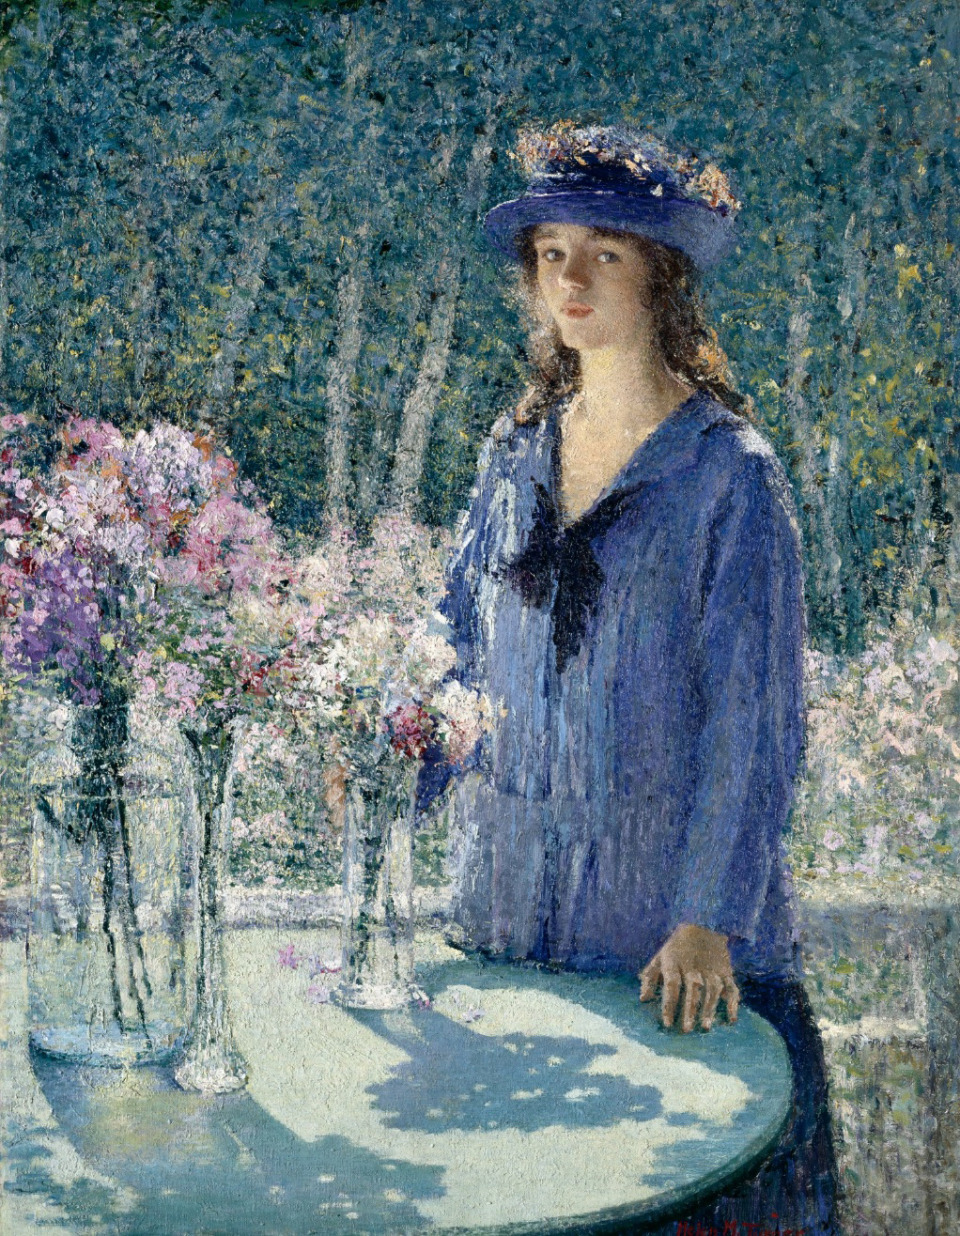 <strong>Helen M. Turner, American, 1858-1958, "Flower Girl" (1920), oil by canvas, is by Helen M. Turner (1858-1958). It&rsquo;s on exhibition at the Dixon.</strong> (Courtesy Dixon Gallery &amp; Gardens)